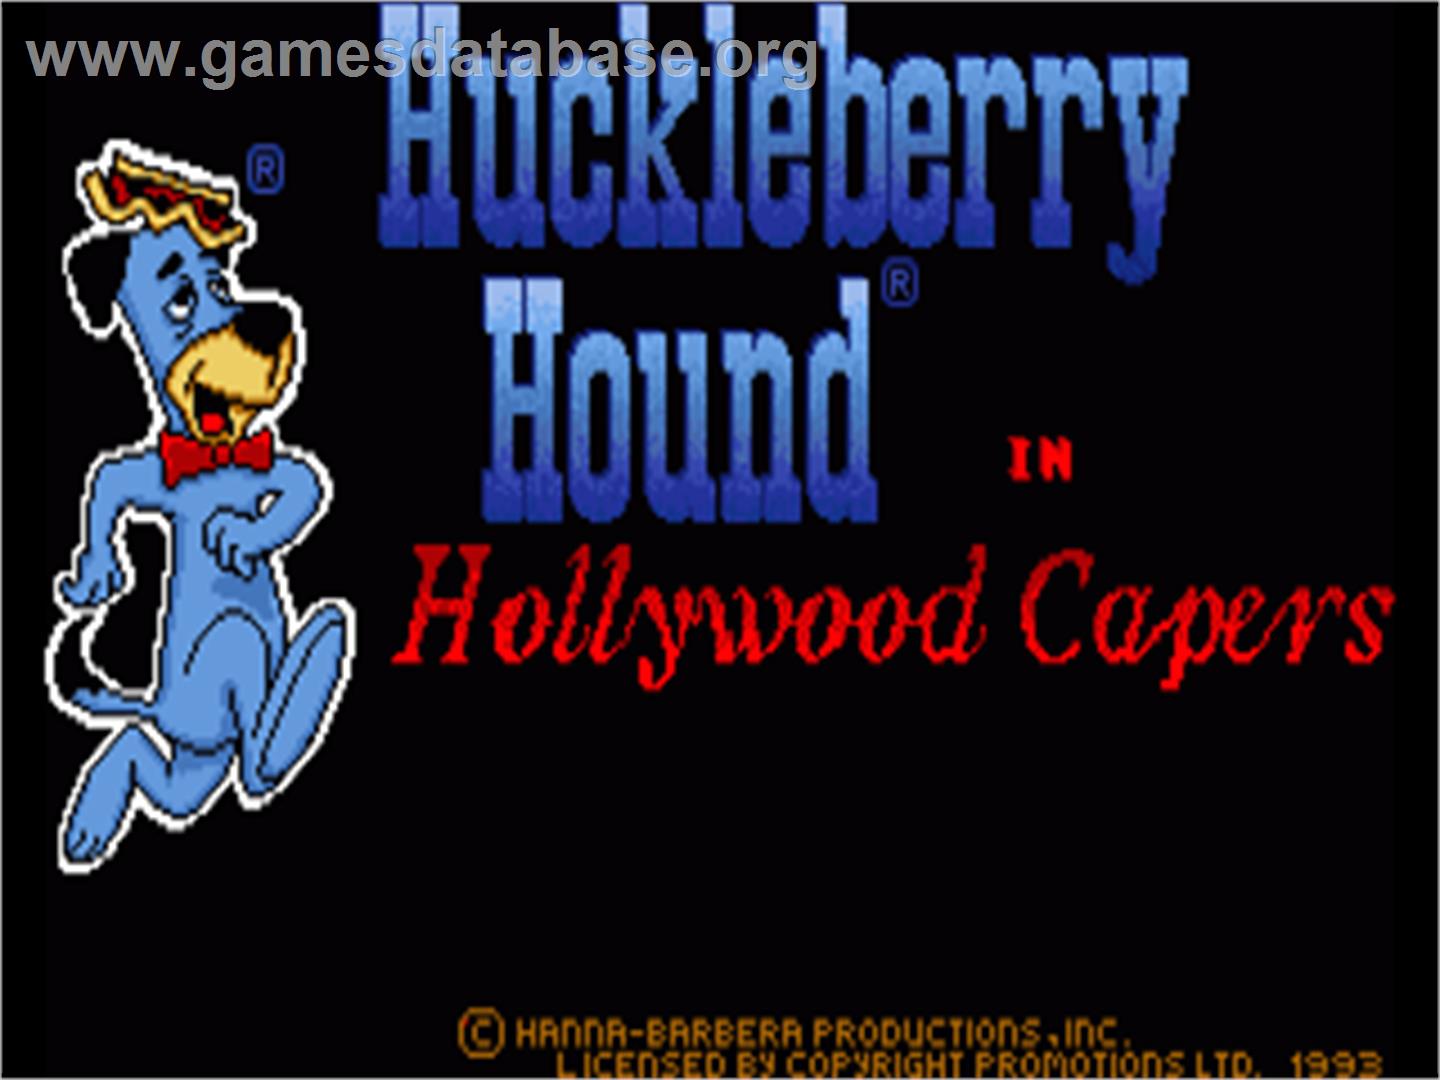 Huckleberry Hound in Hollywood Capers - Commodore Amiga - Artwork - Title Screen